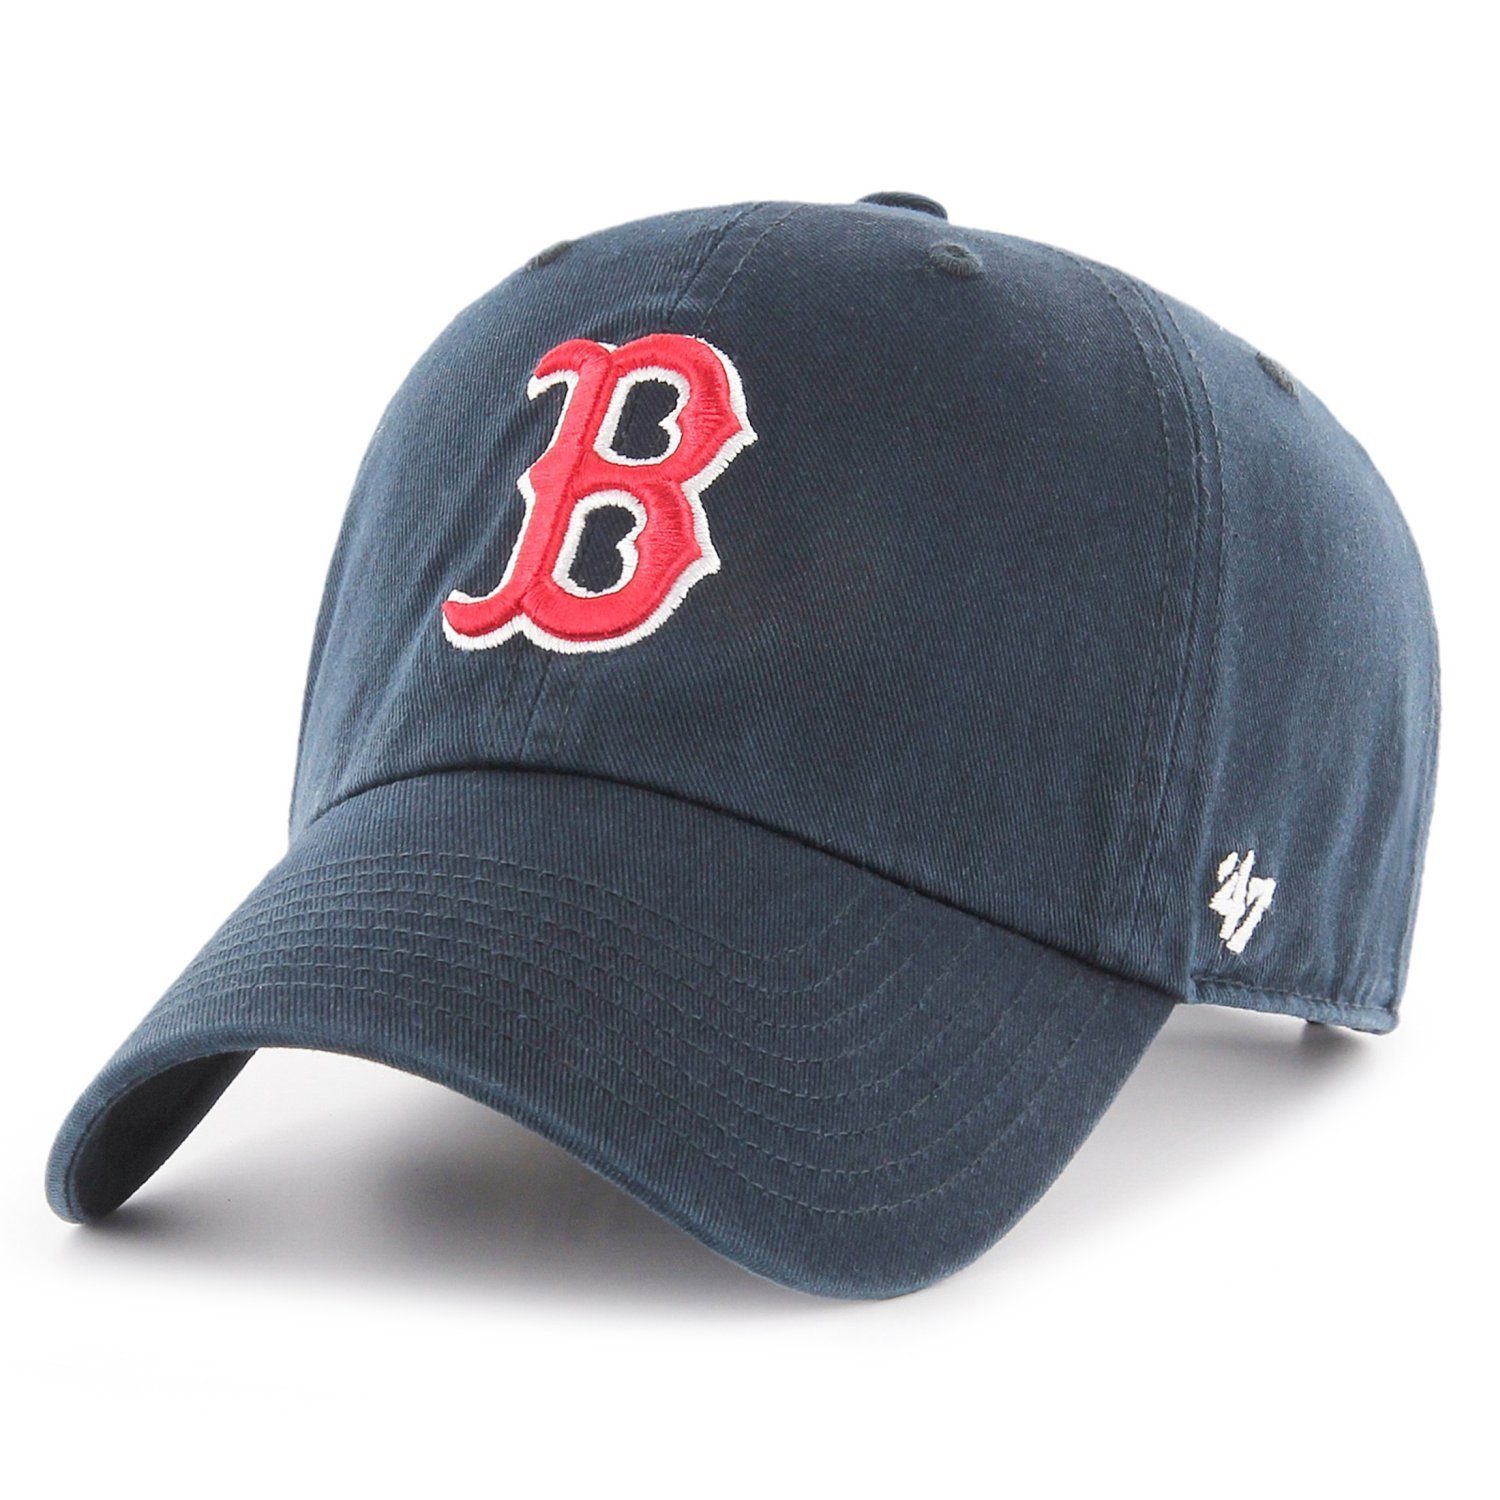 '47 MLB Red Fit Brand Boston Relaxed Trucker Cap Sox